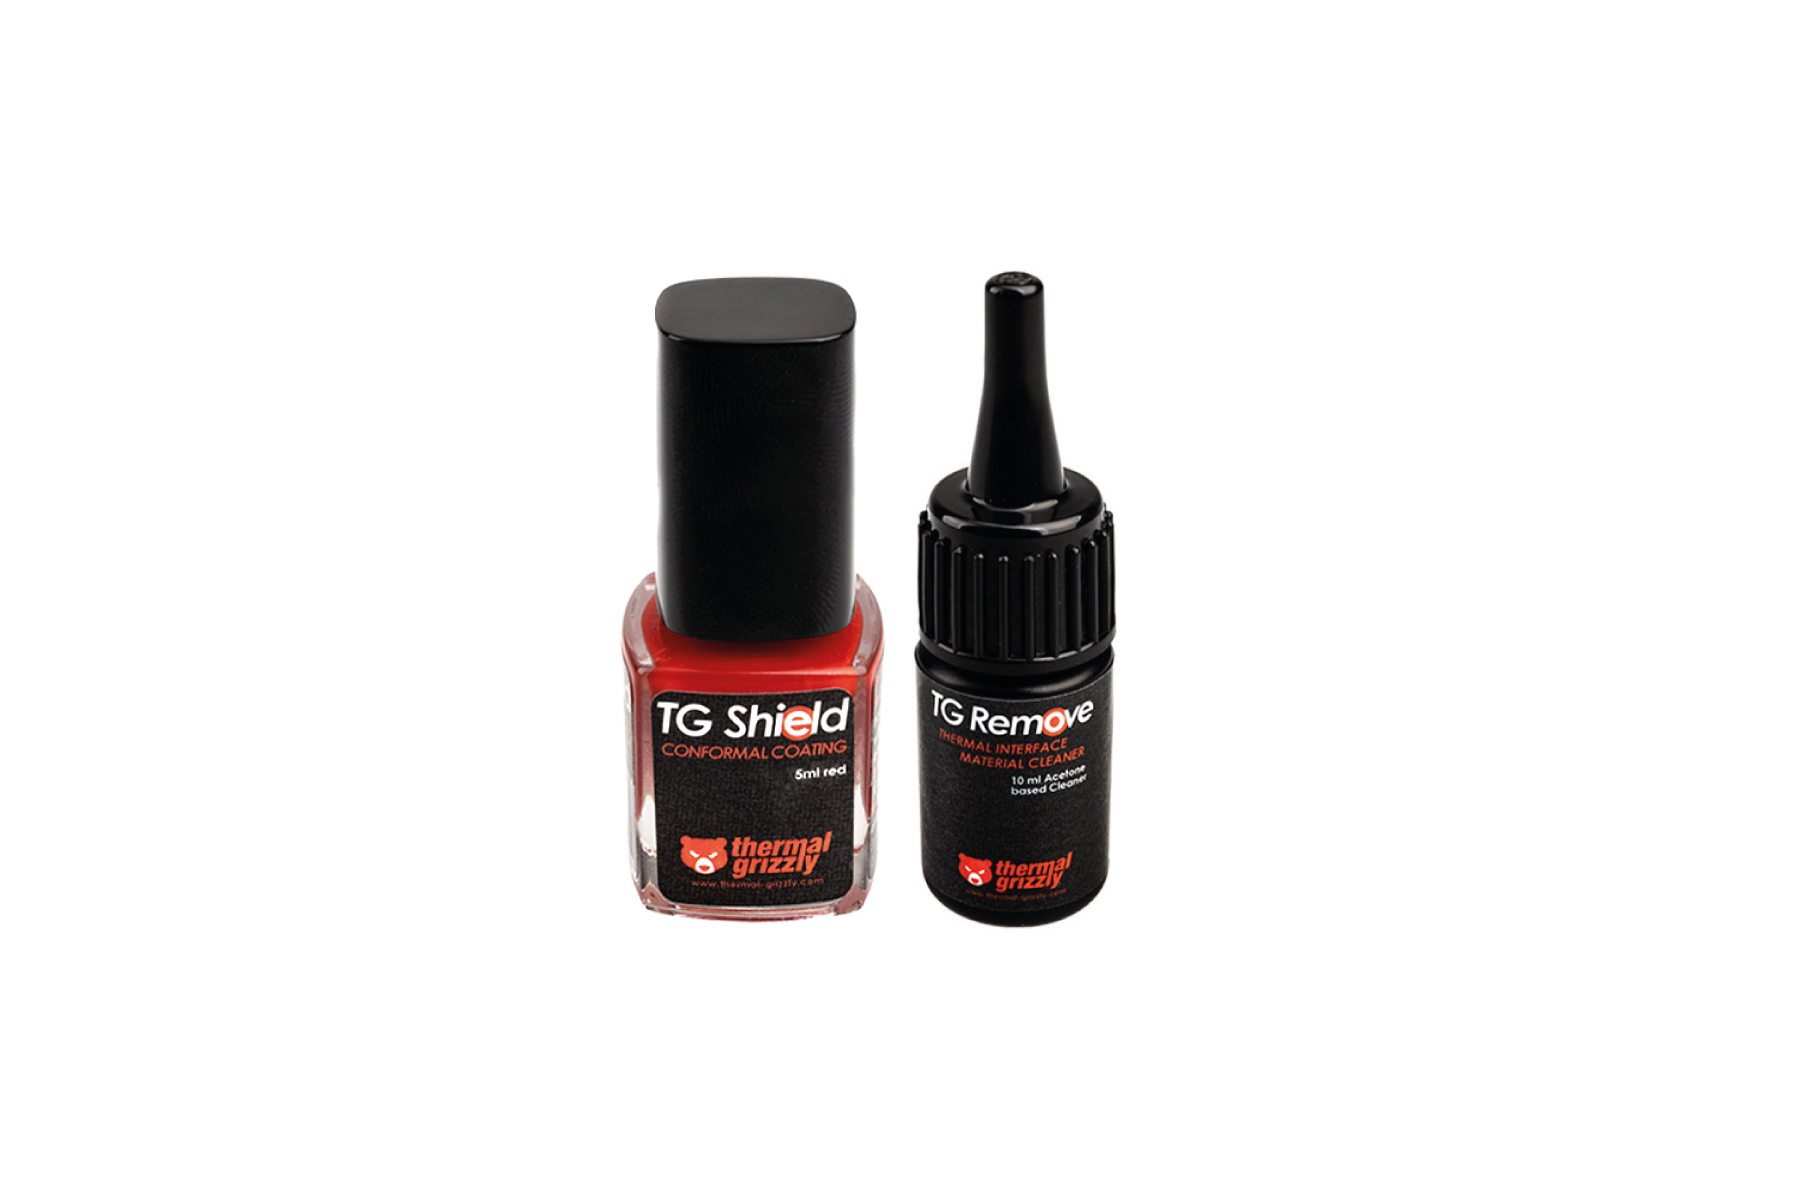 THERMAL GRIZZLY Shield & Wärmeleitpaste, 15ml Red Bundle Remove